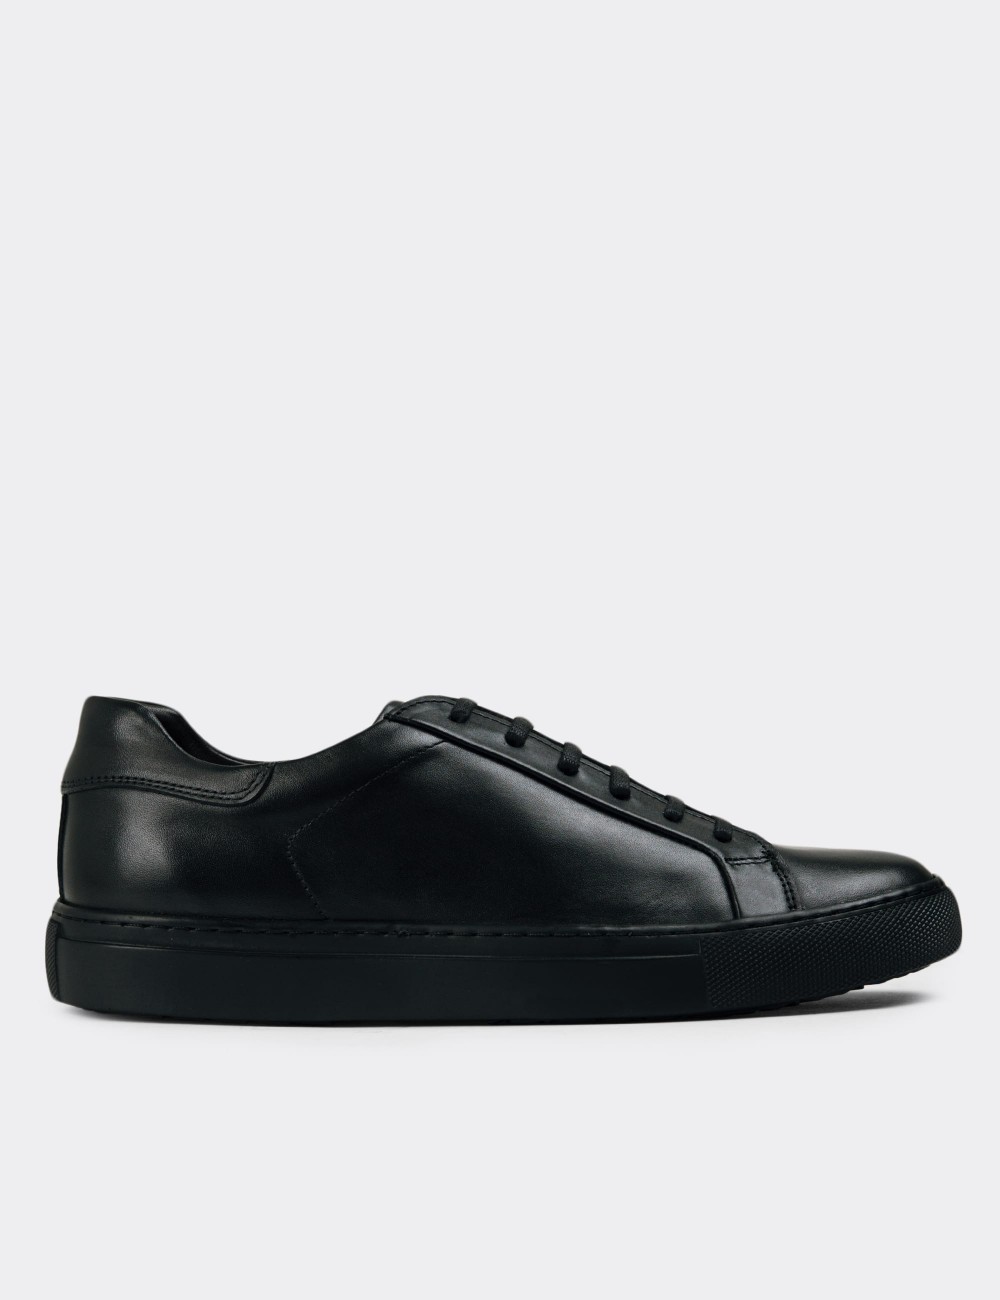 Black Leather Sneakers - 01829MSYHC08